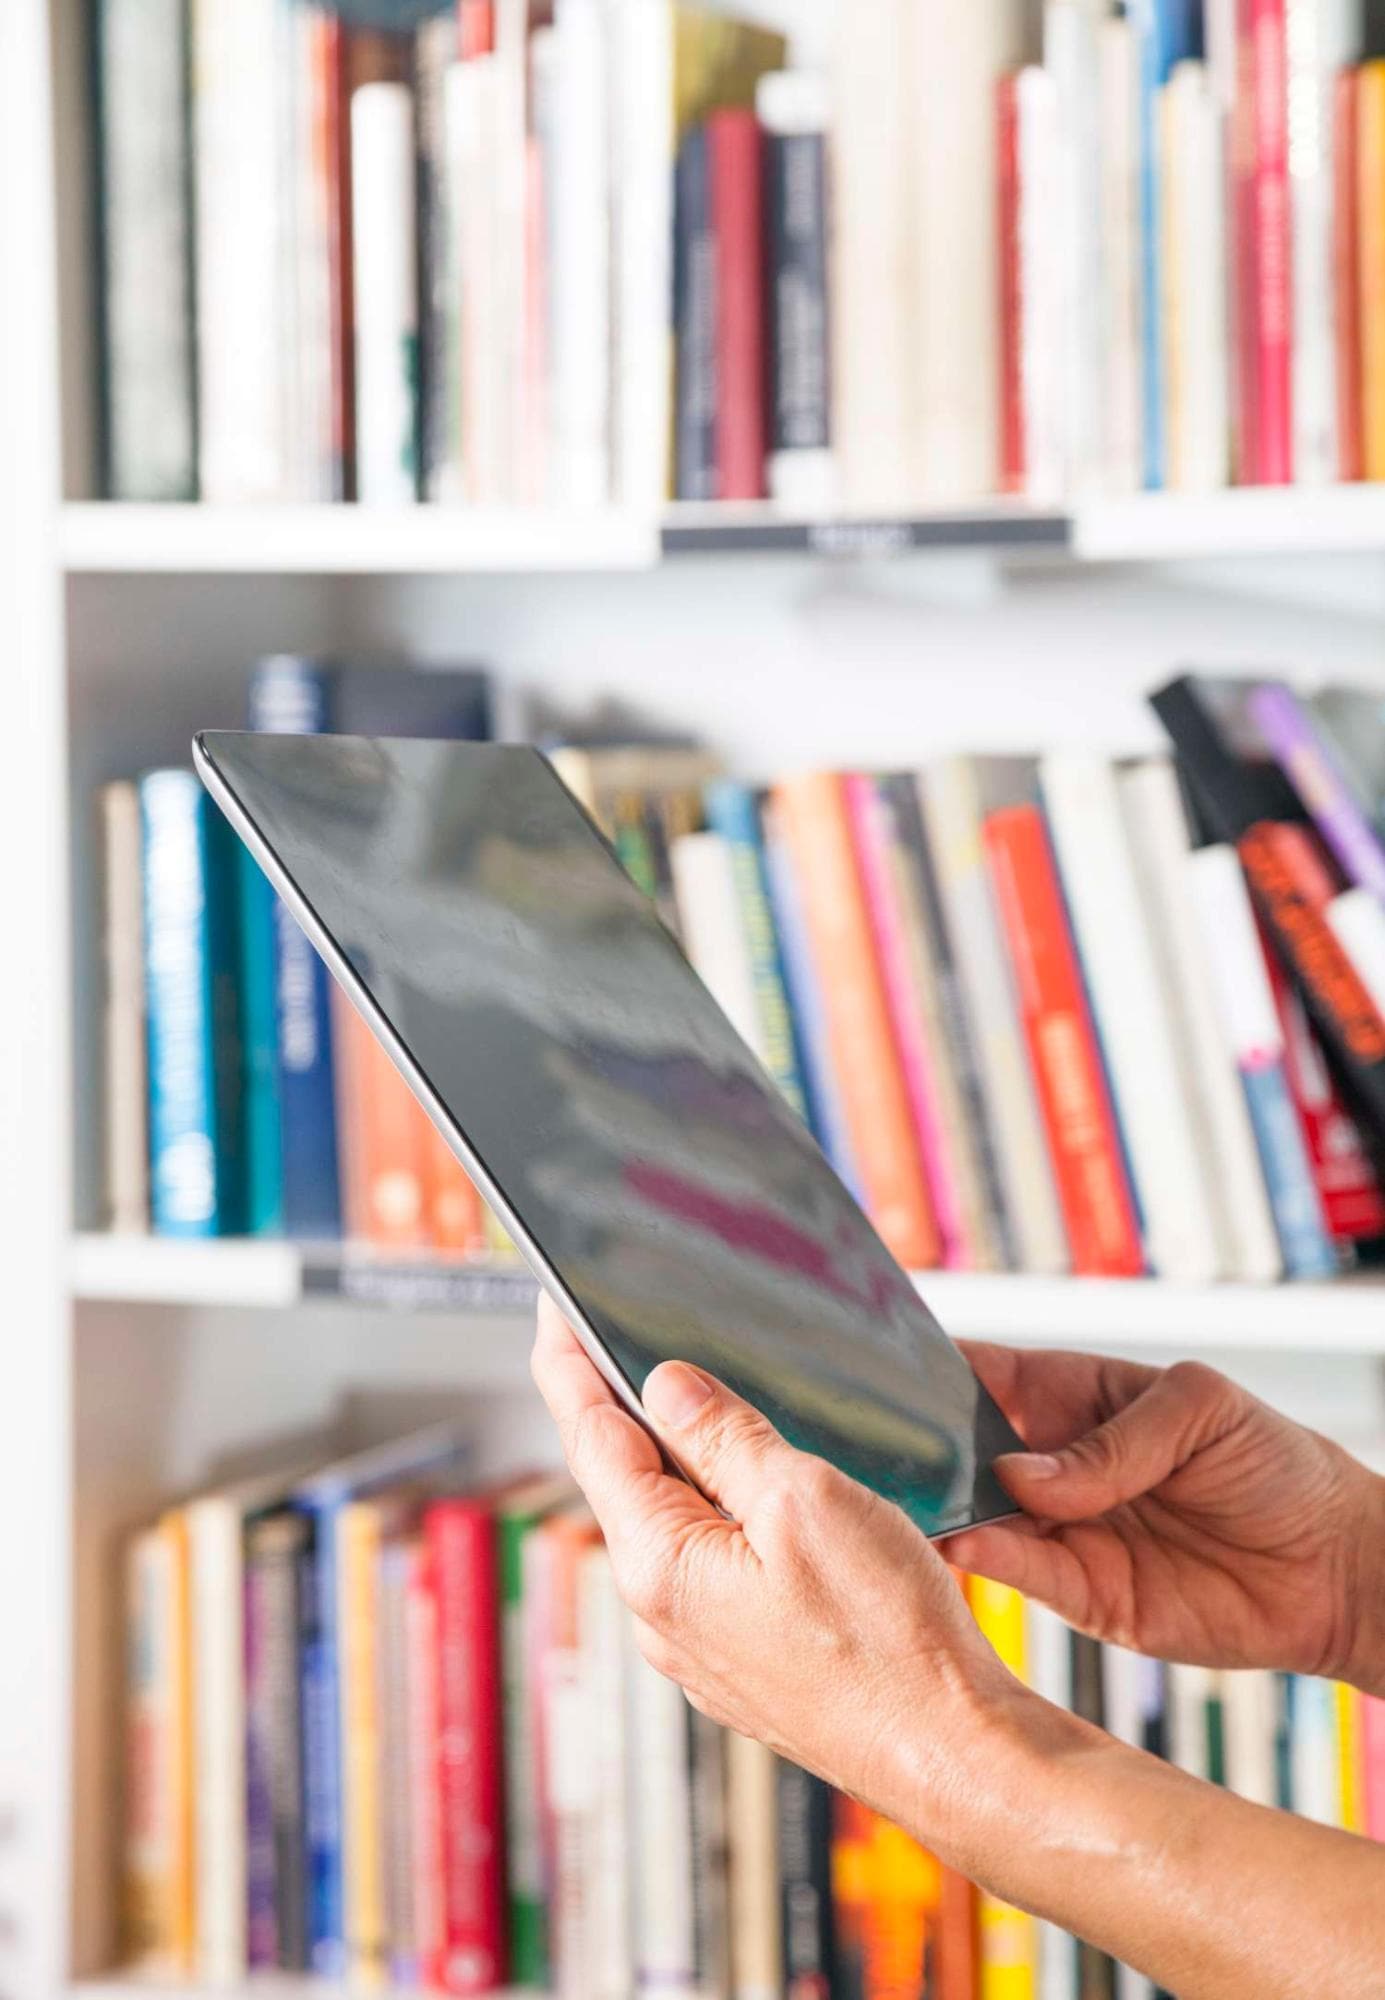 Person using a tablet with a  shelf of books in background